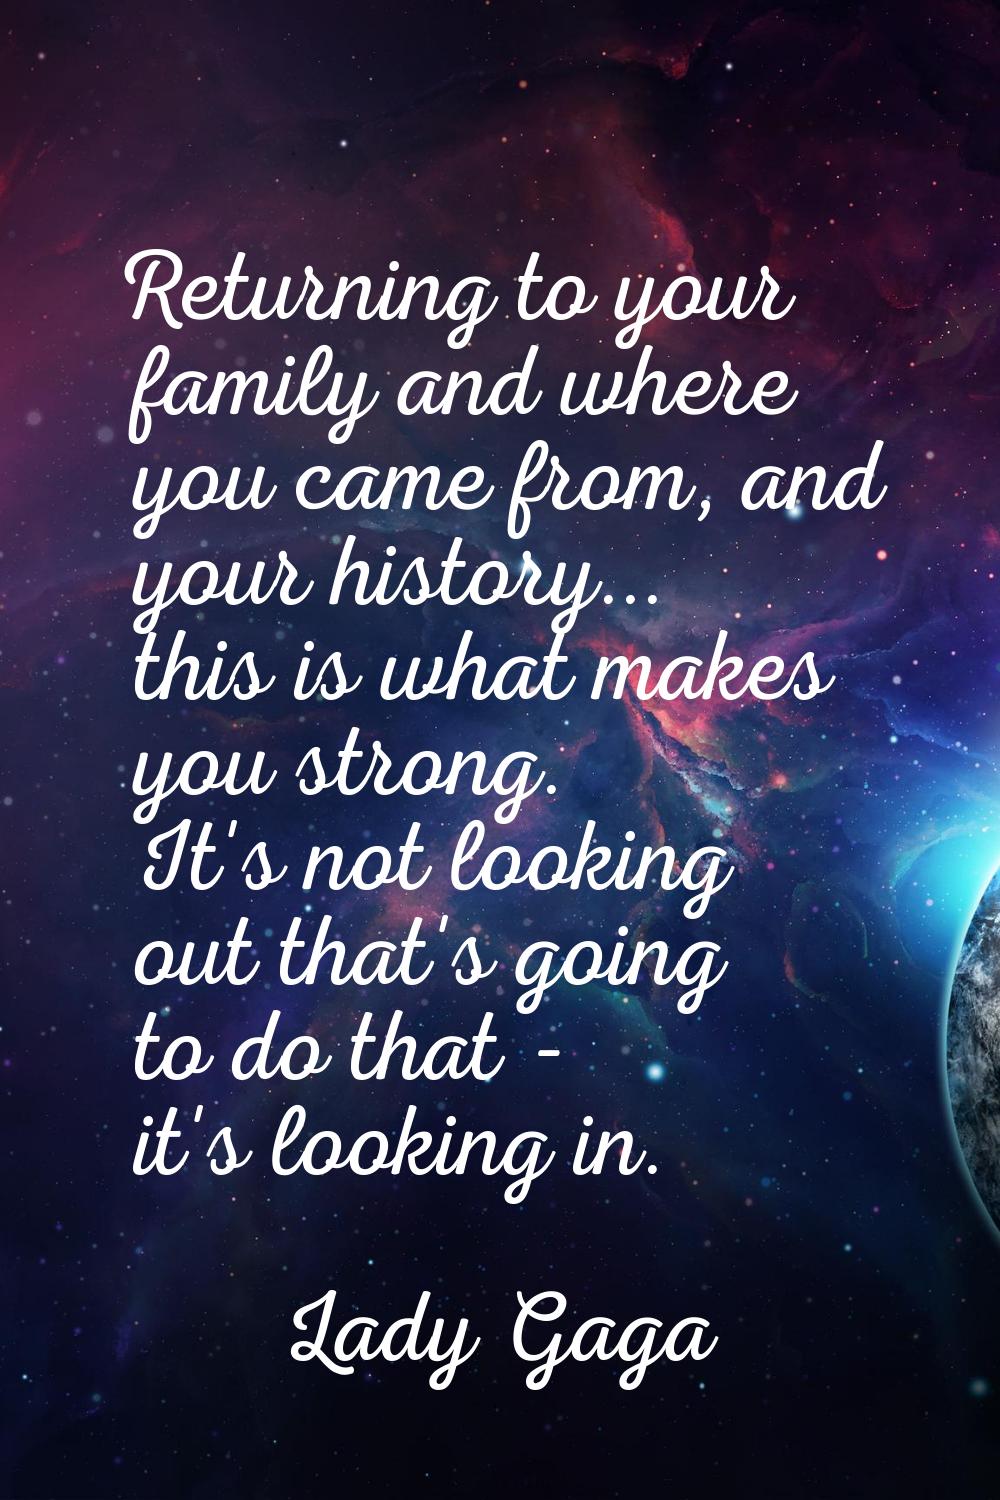 Returning to your family and where you came from, and your history... this is what makes you strong